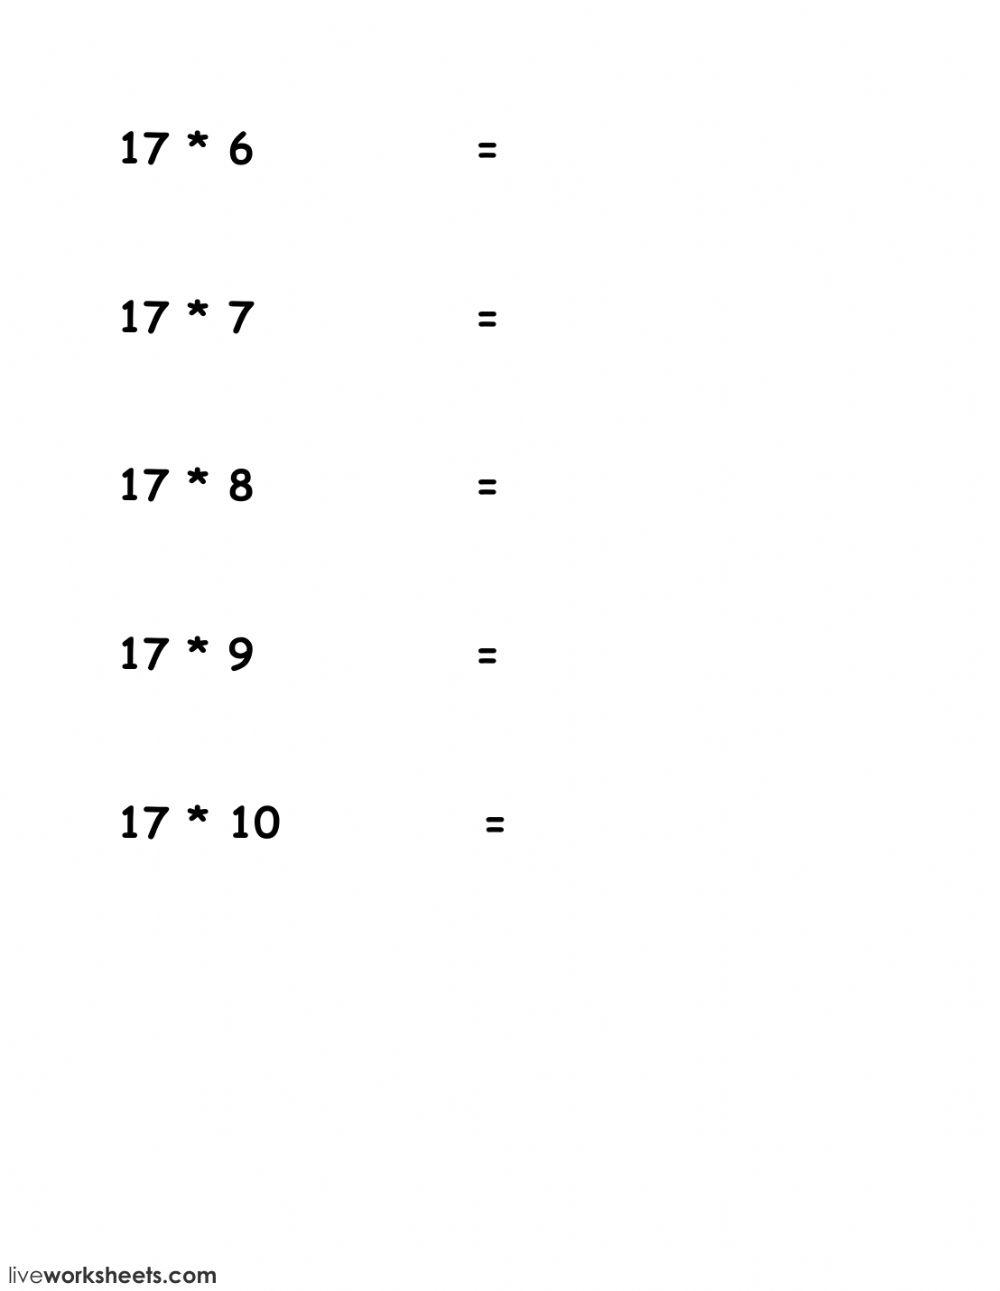 17 times table